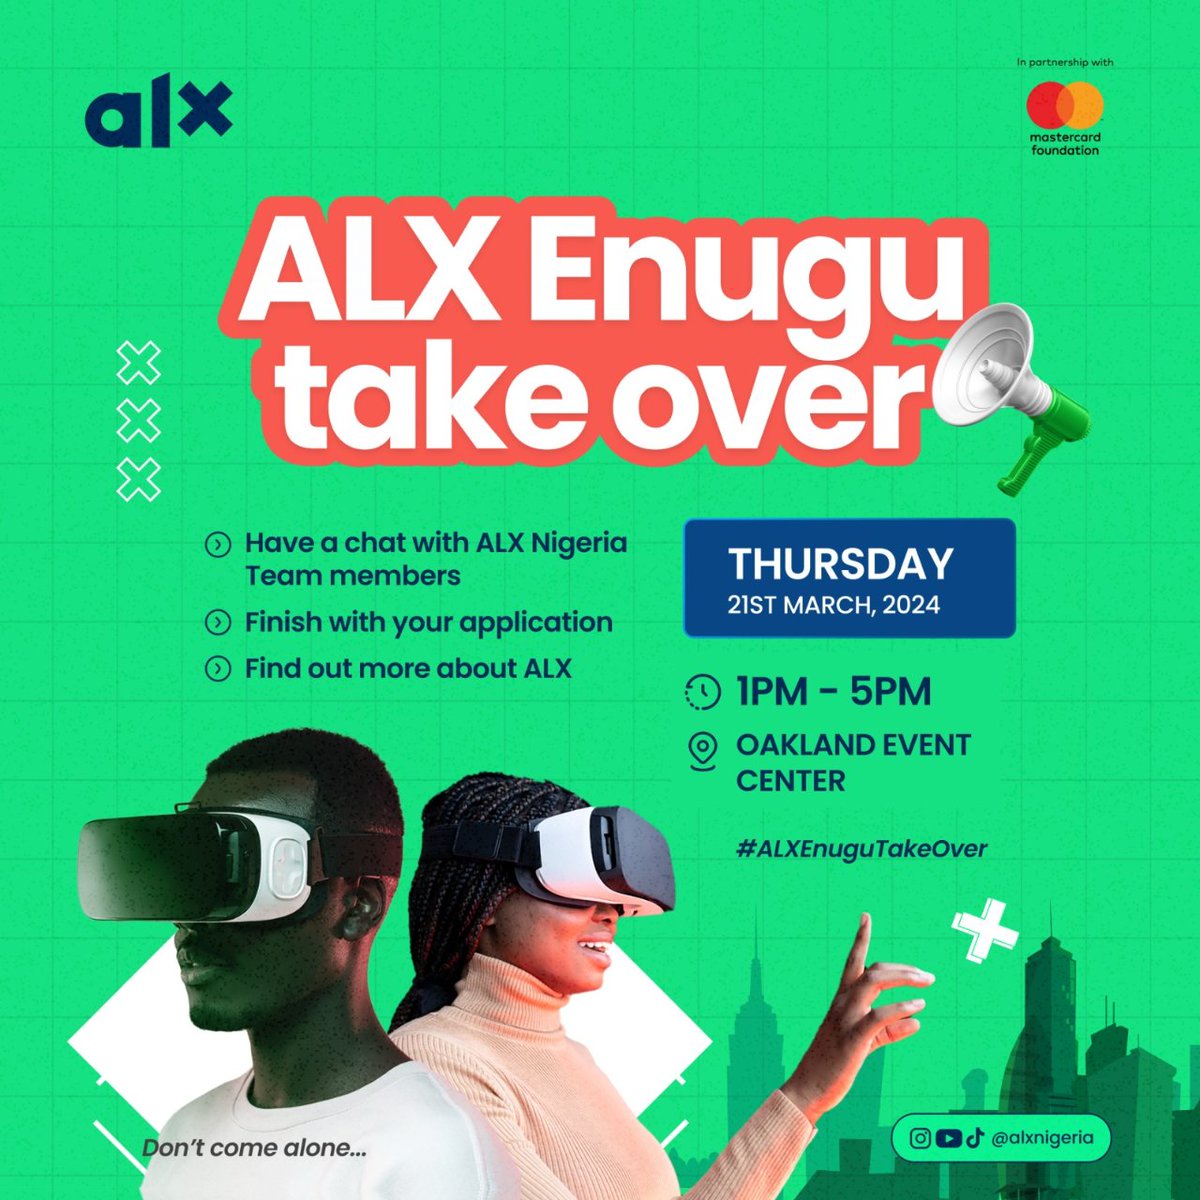 Tomorrow, the 21st of March 2024, #ALXNigeria will be coming to #Enugu, and it's going down in History! Join them at the Oakland Event Centre Dem dey for you😁, so no dull yourself o! Come with your questions, and see you there 😏 #ALXEnuguTakeOver #DoTechWithALX #DoHardThings 🔥